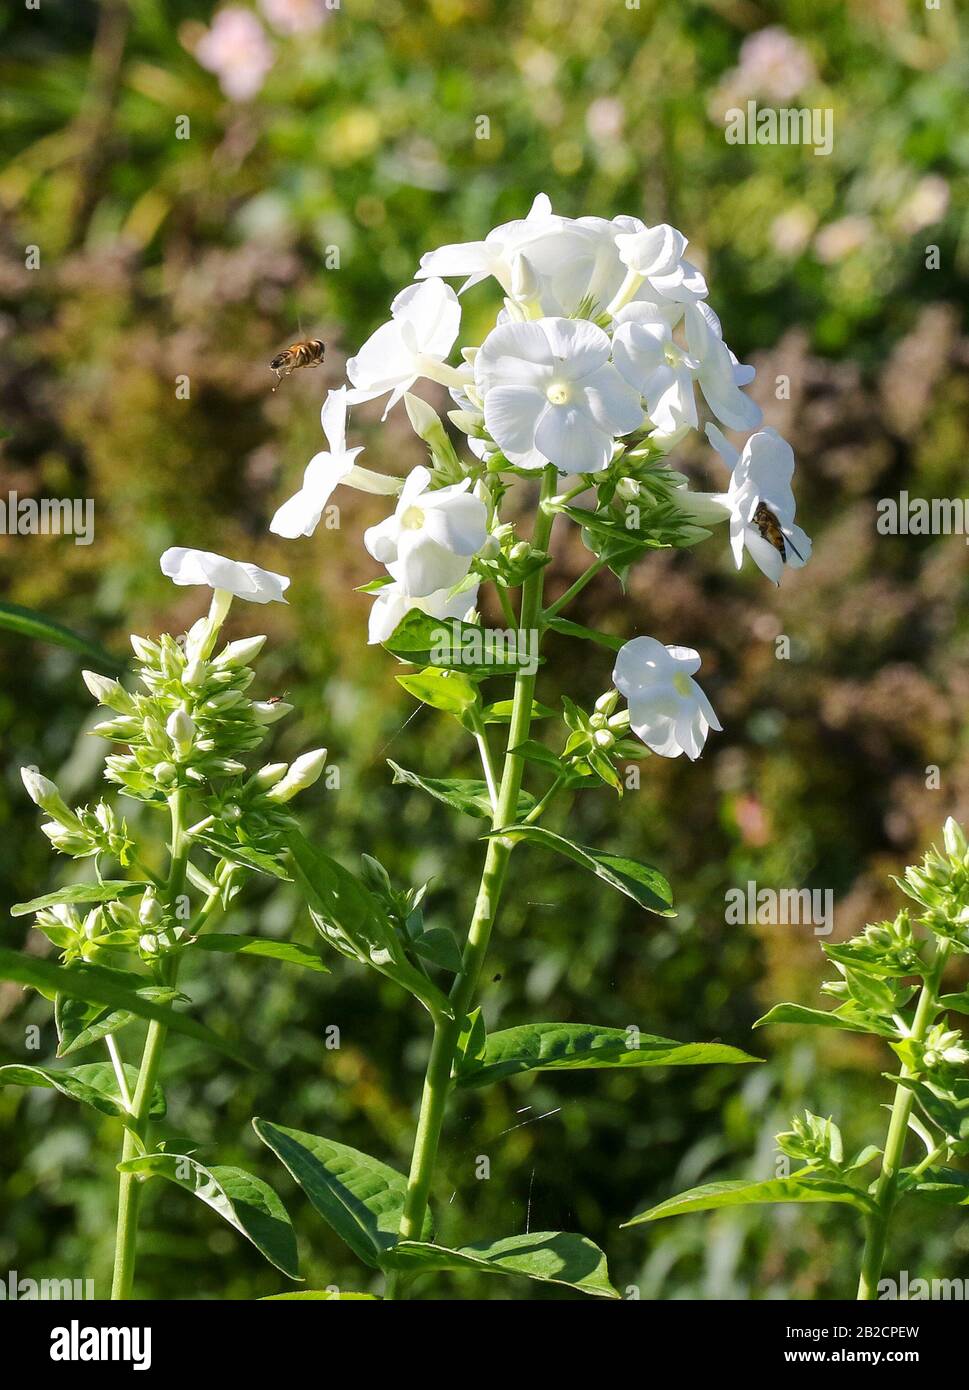 Insects gathering nectar from a white flowerhead in warm autumn sunshine in Ireland. Stock Photo